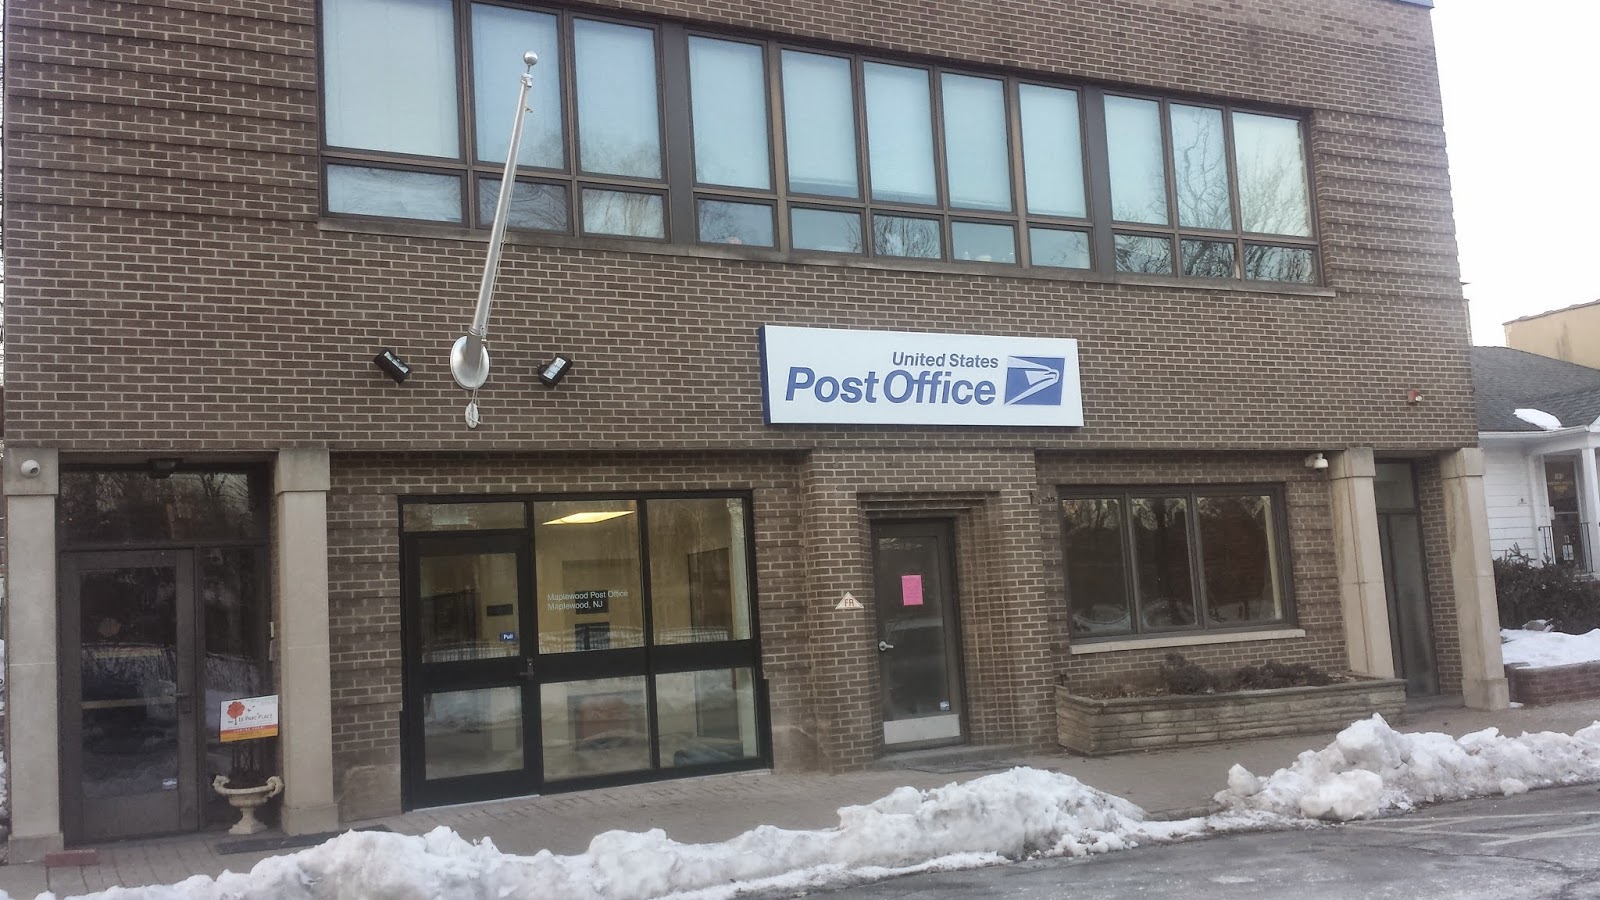 What does the post office do with undelivered mail?